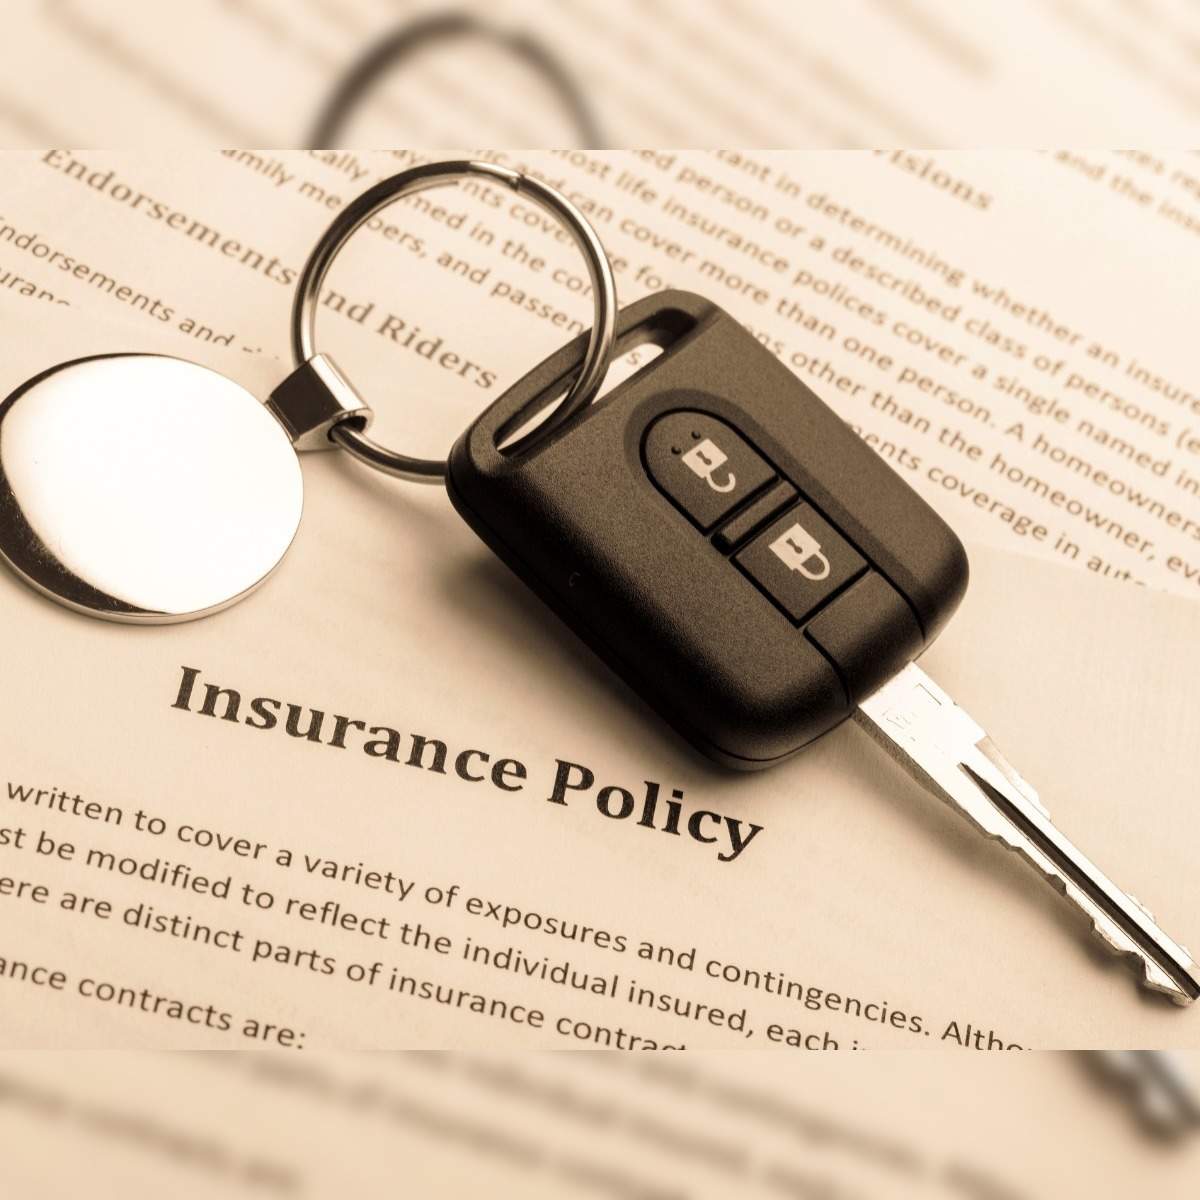 Car insurance: Not insuring your car keys can cost you heavily now